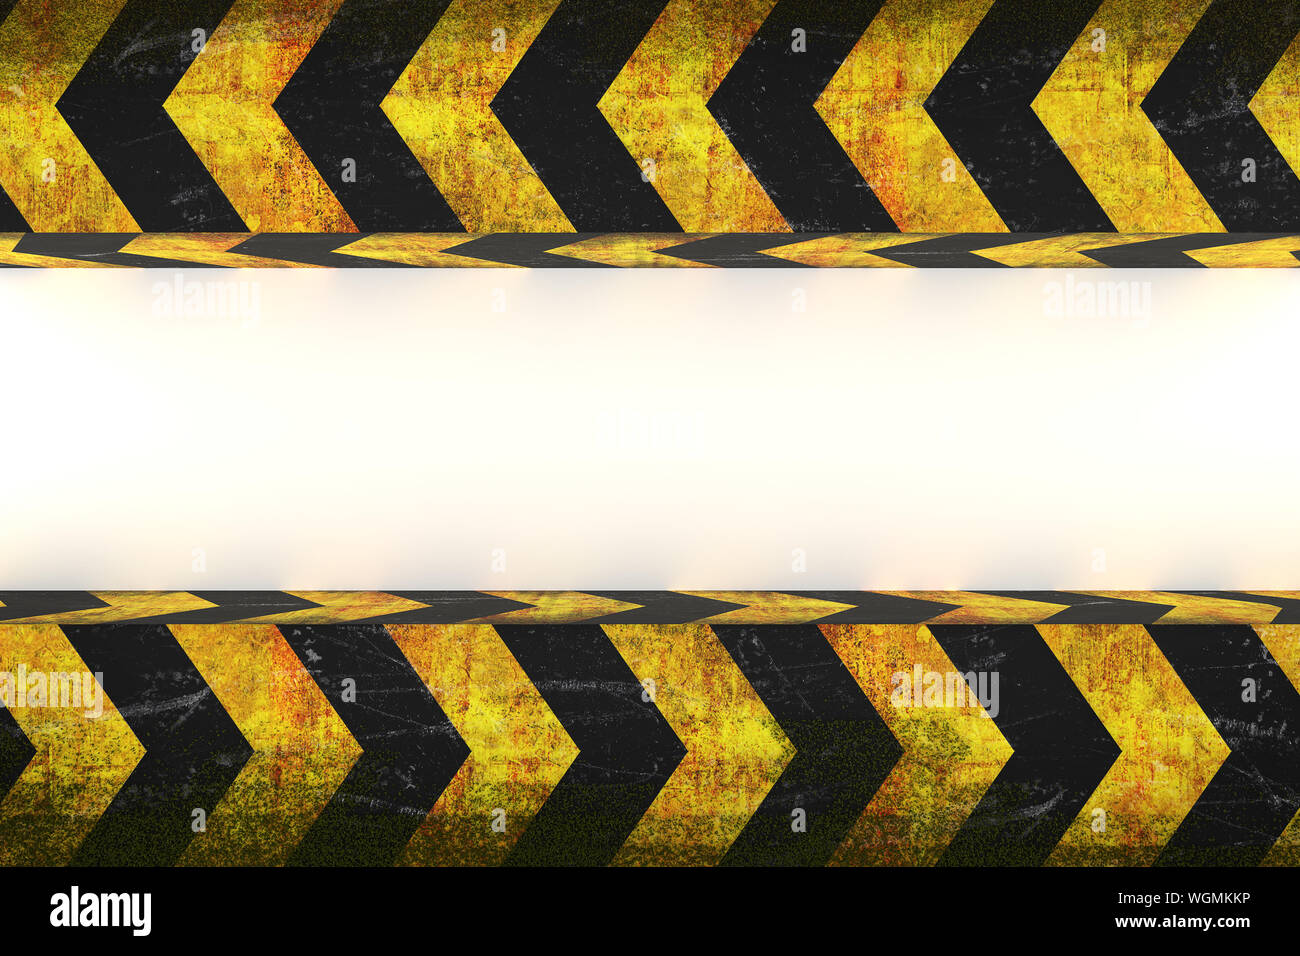 3d rendering of warning hazard grunge pattern in yellow and black color covered by moss Stock Photo